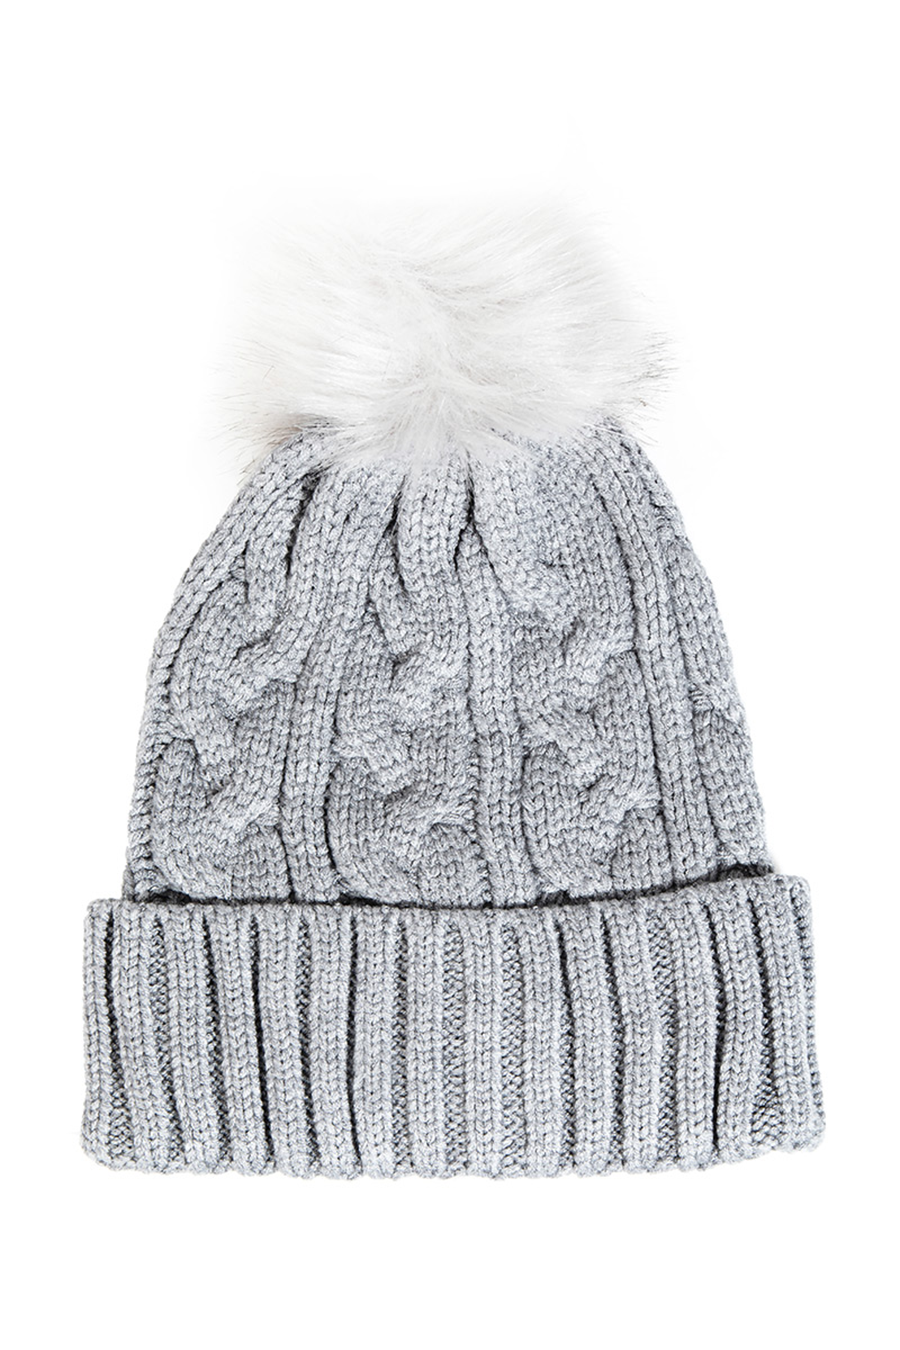 Ribbed Knit Pom Beanie | Grey - Main Image Number 1 of 1